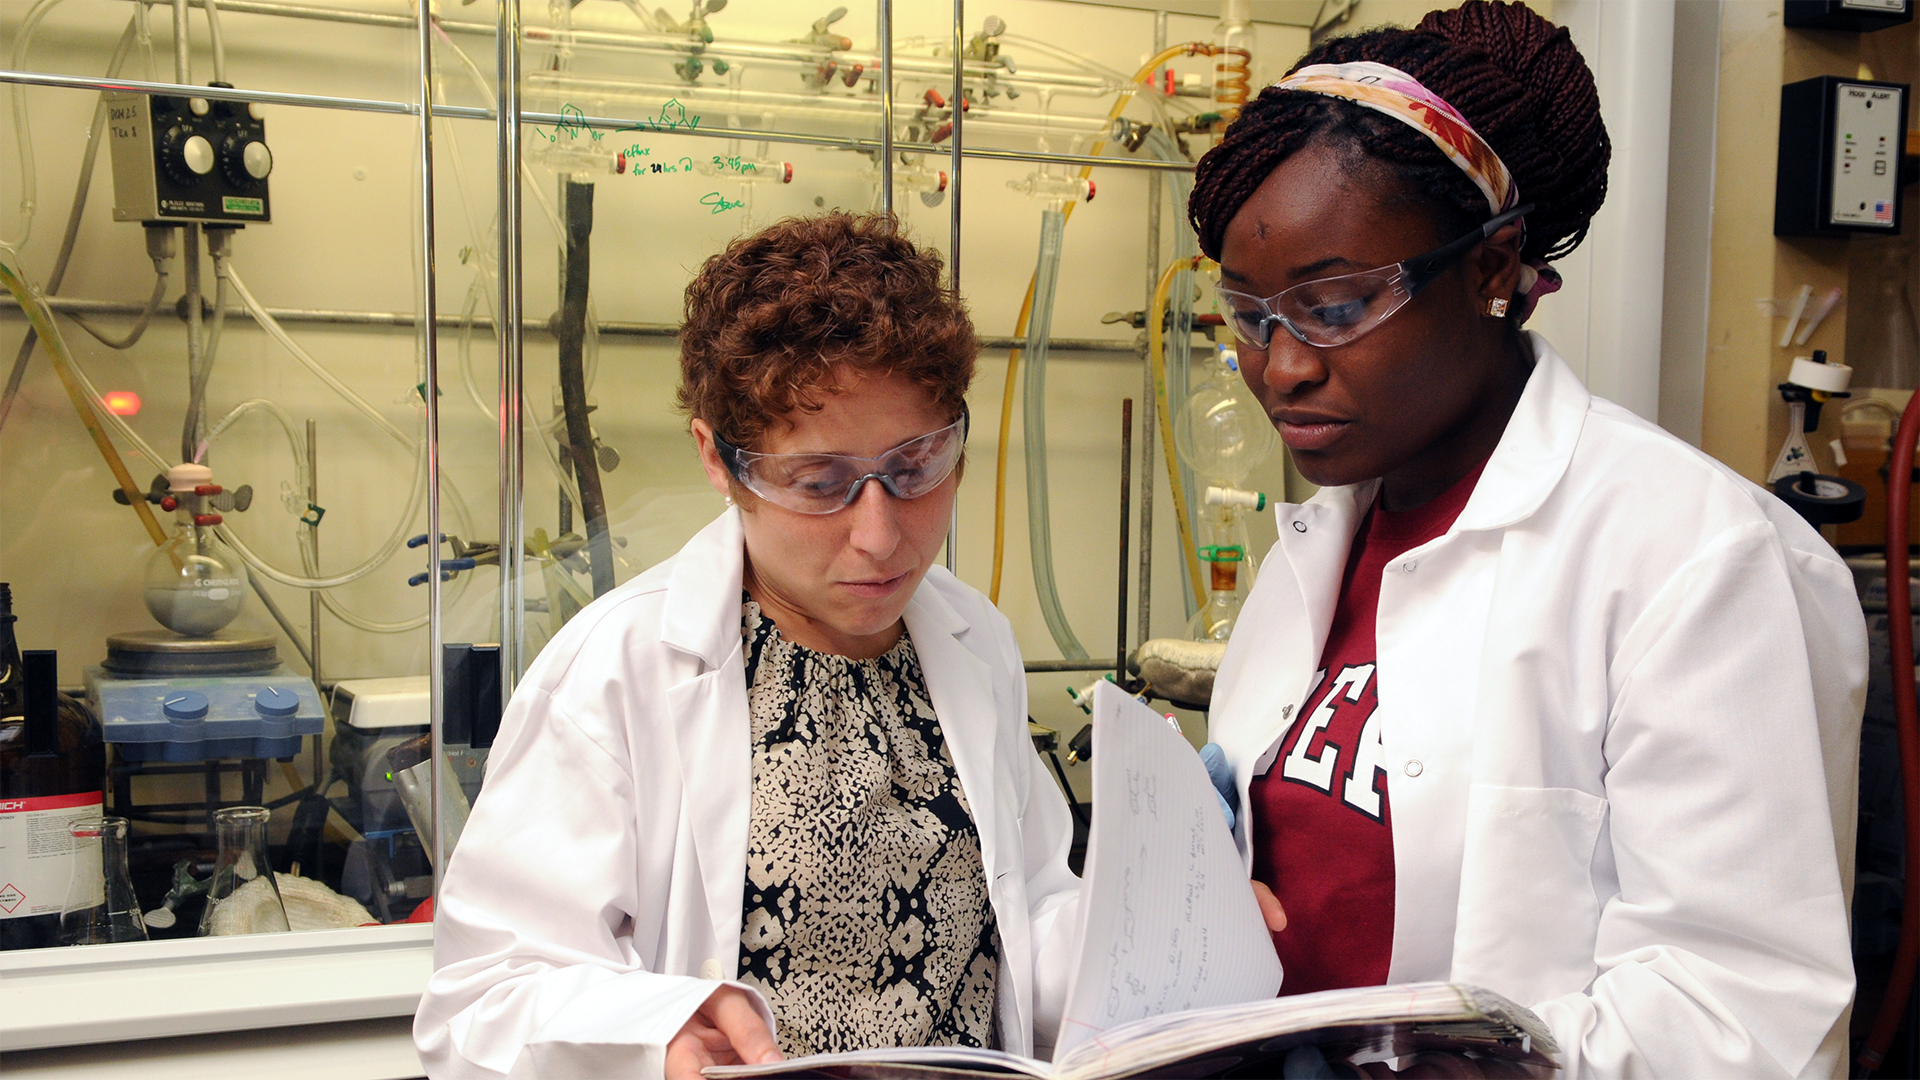 Faculty and student collaborate on research